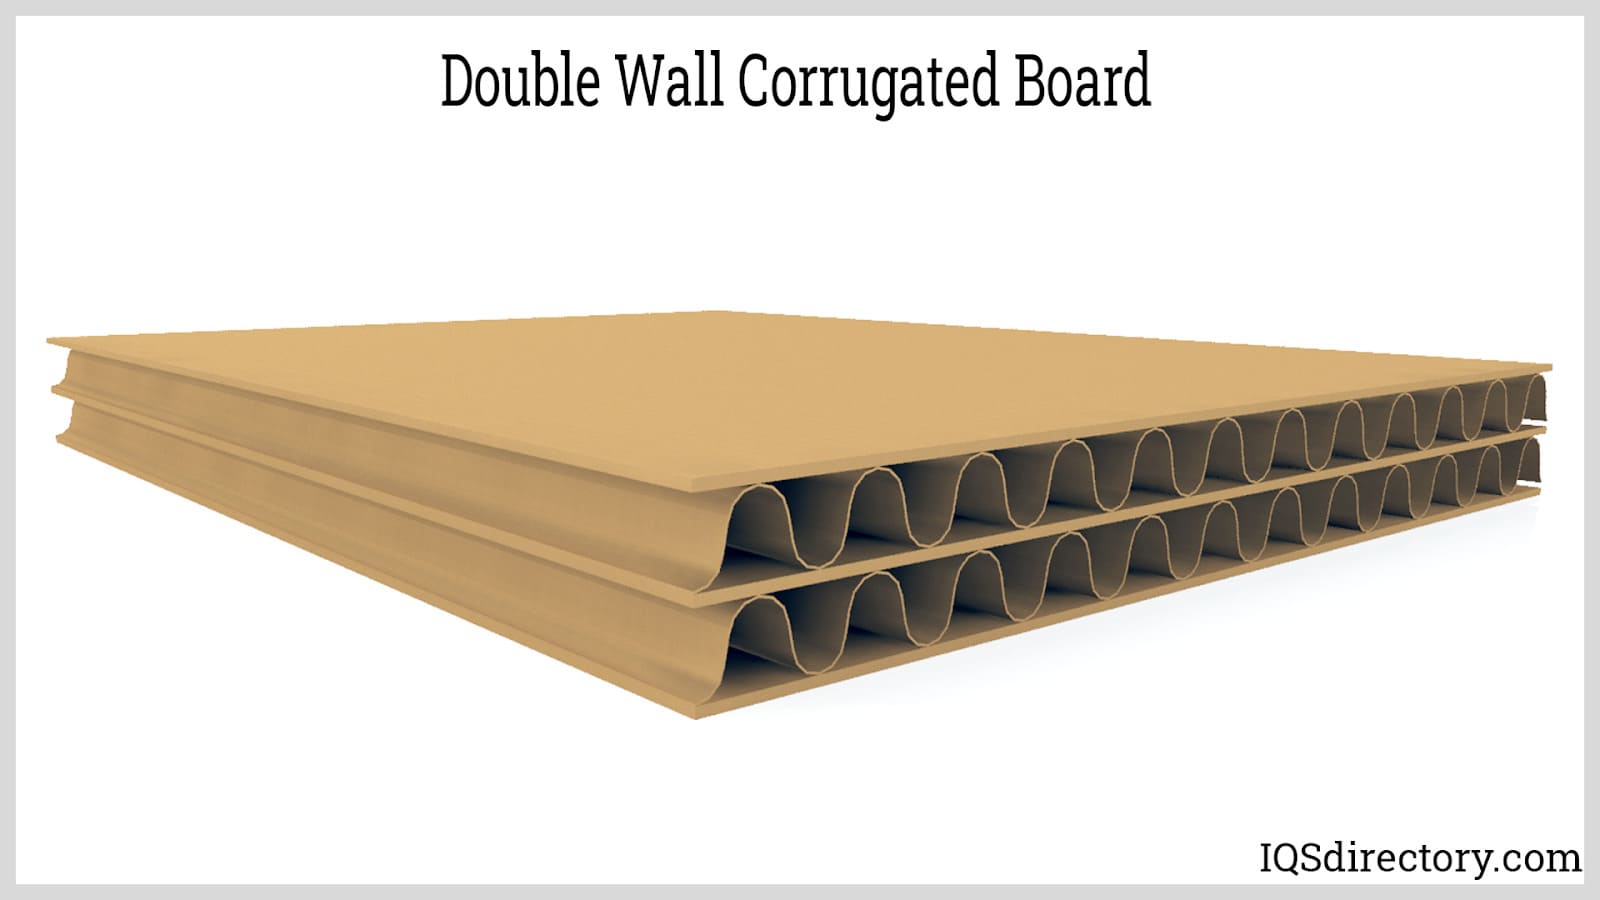 Double Wall Corrugated Board from American Paper and Packaging